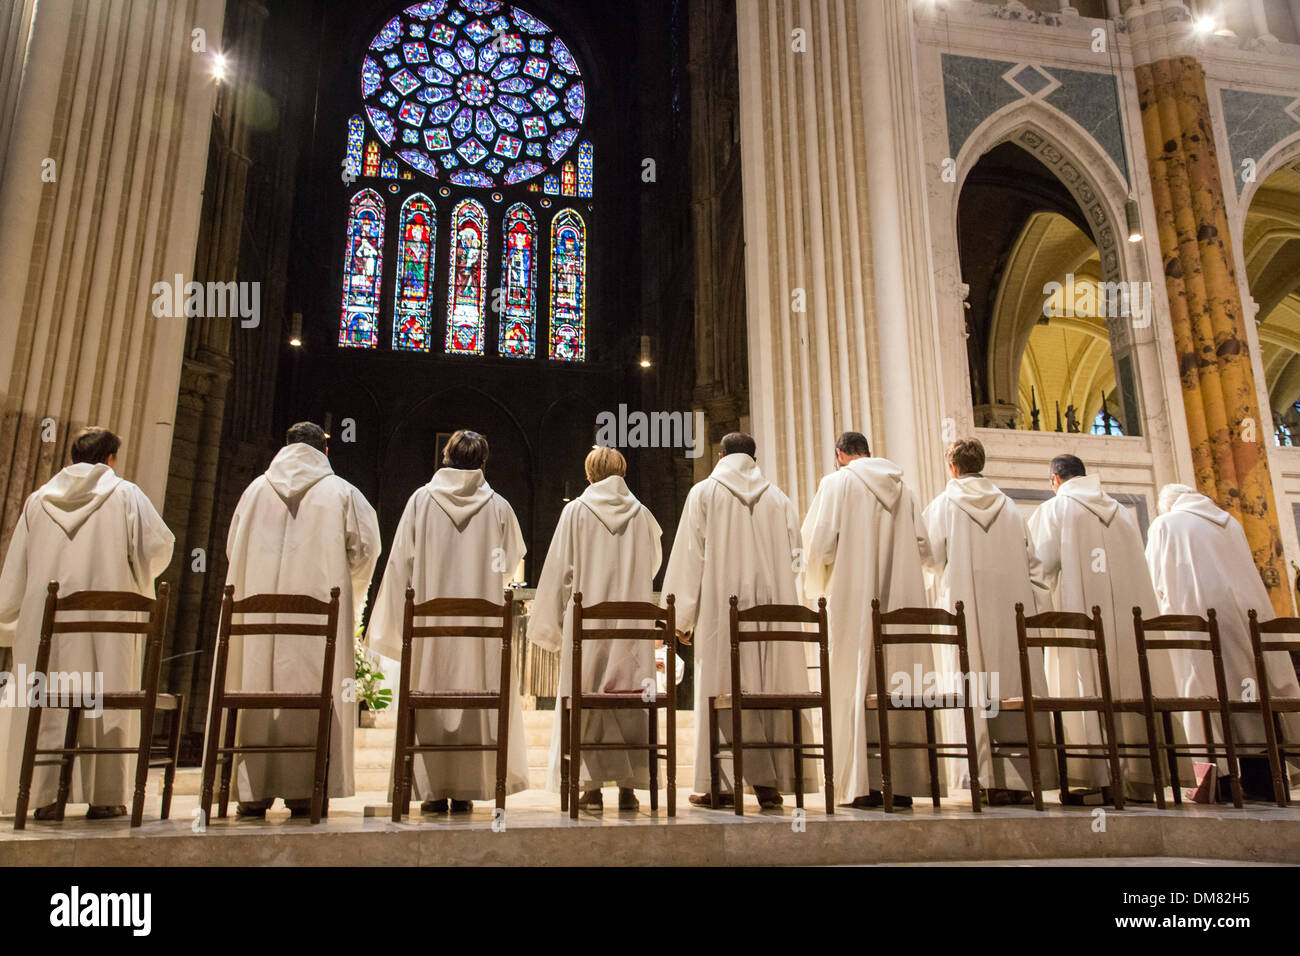 CELEBRATING VESPERS, INTERIOR OF THE OUR LADY OF CHARTRES CATHEDRAL, LISTED AS A WORLD HERITAGE SITE BY UNESCO, EURE-ET-LOIR (28), FRANCE Stock Photo